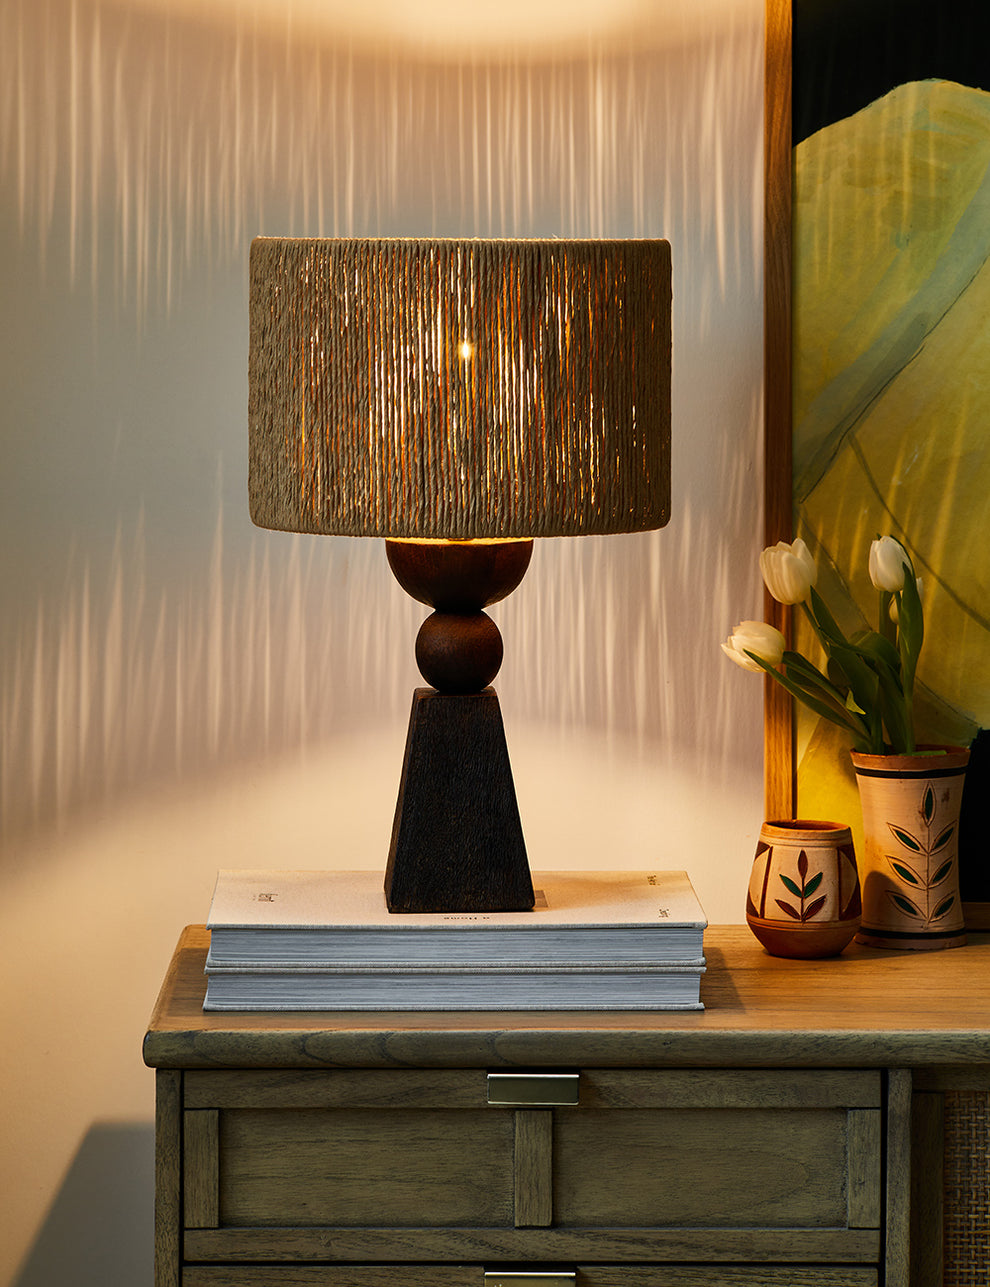 Dark Geometric Wooden Table Lamp With Wicker Lampshade